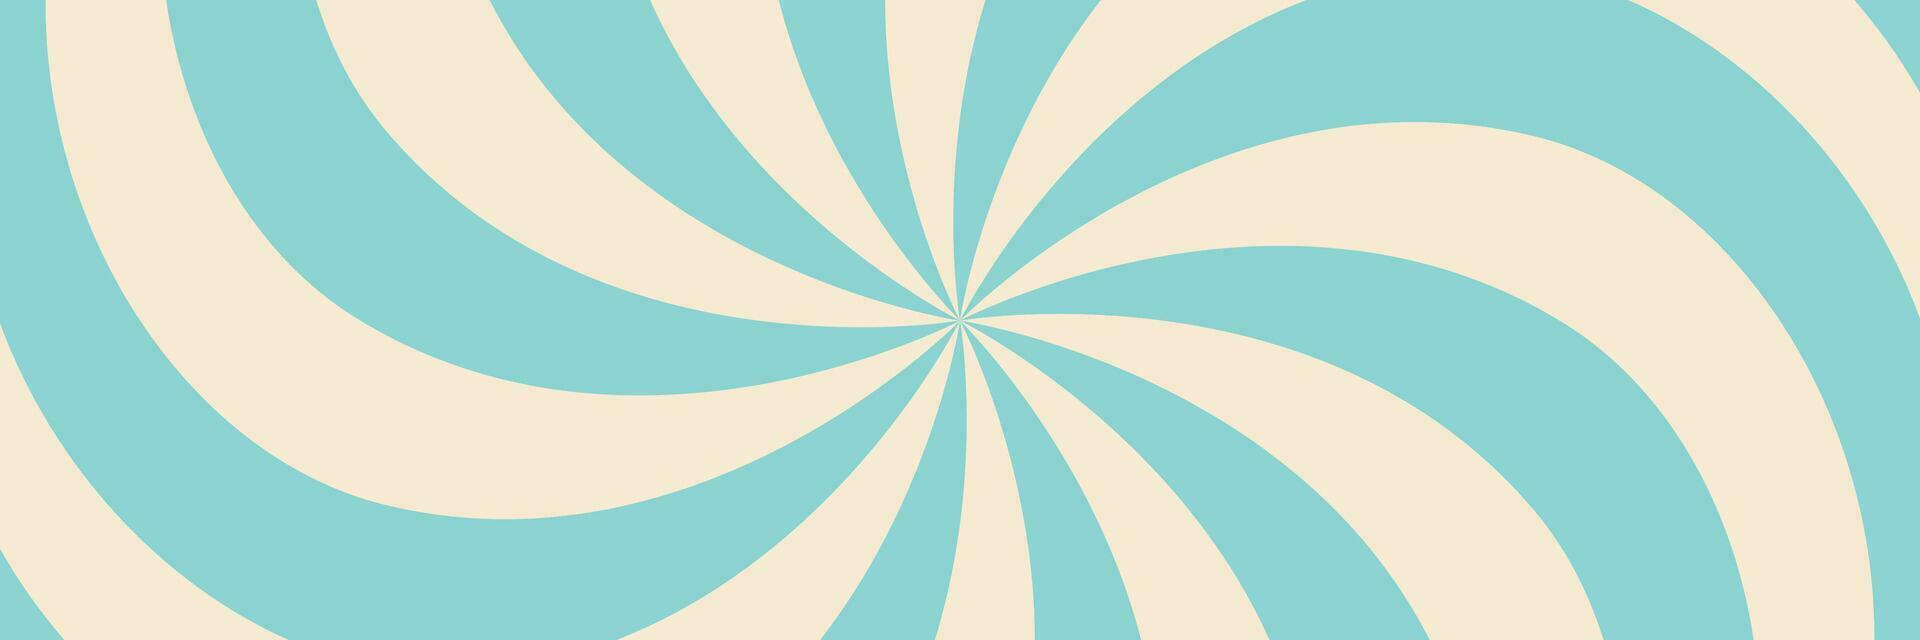 Swirling radial ice cream background. Vector illustration for swirl design. Summer. Vortex spiral twirl. Blue. Helix rotation rays. Converging psychadelic scalable stripes. Fun sun light beams.